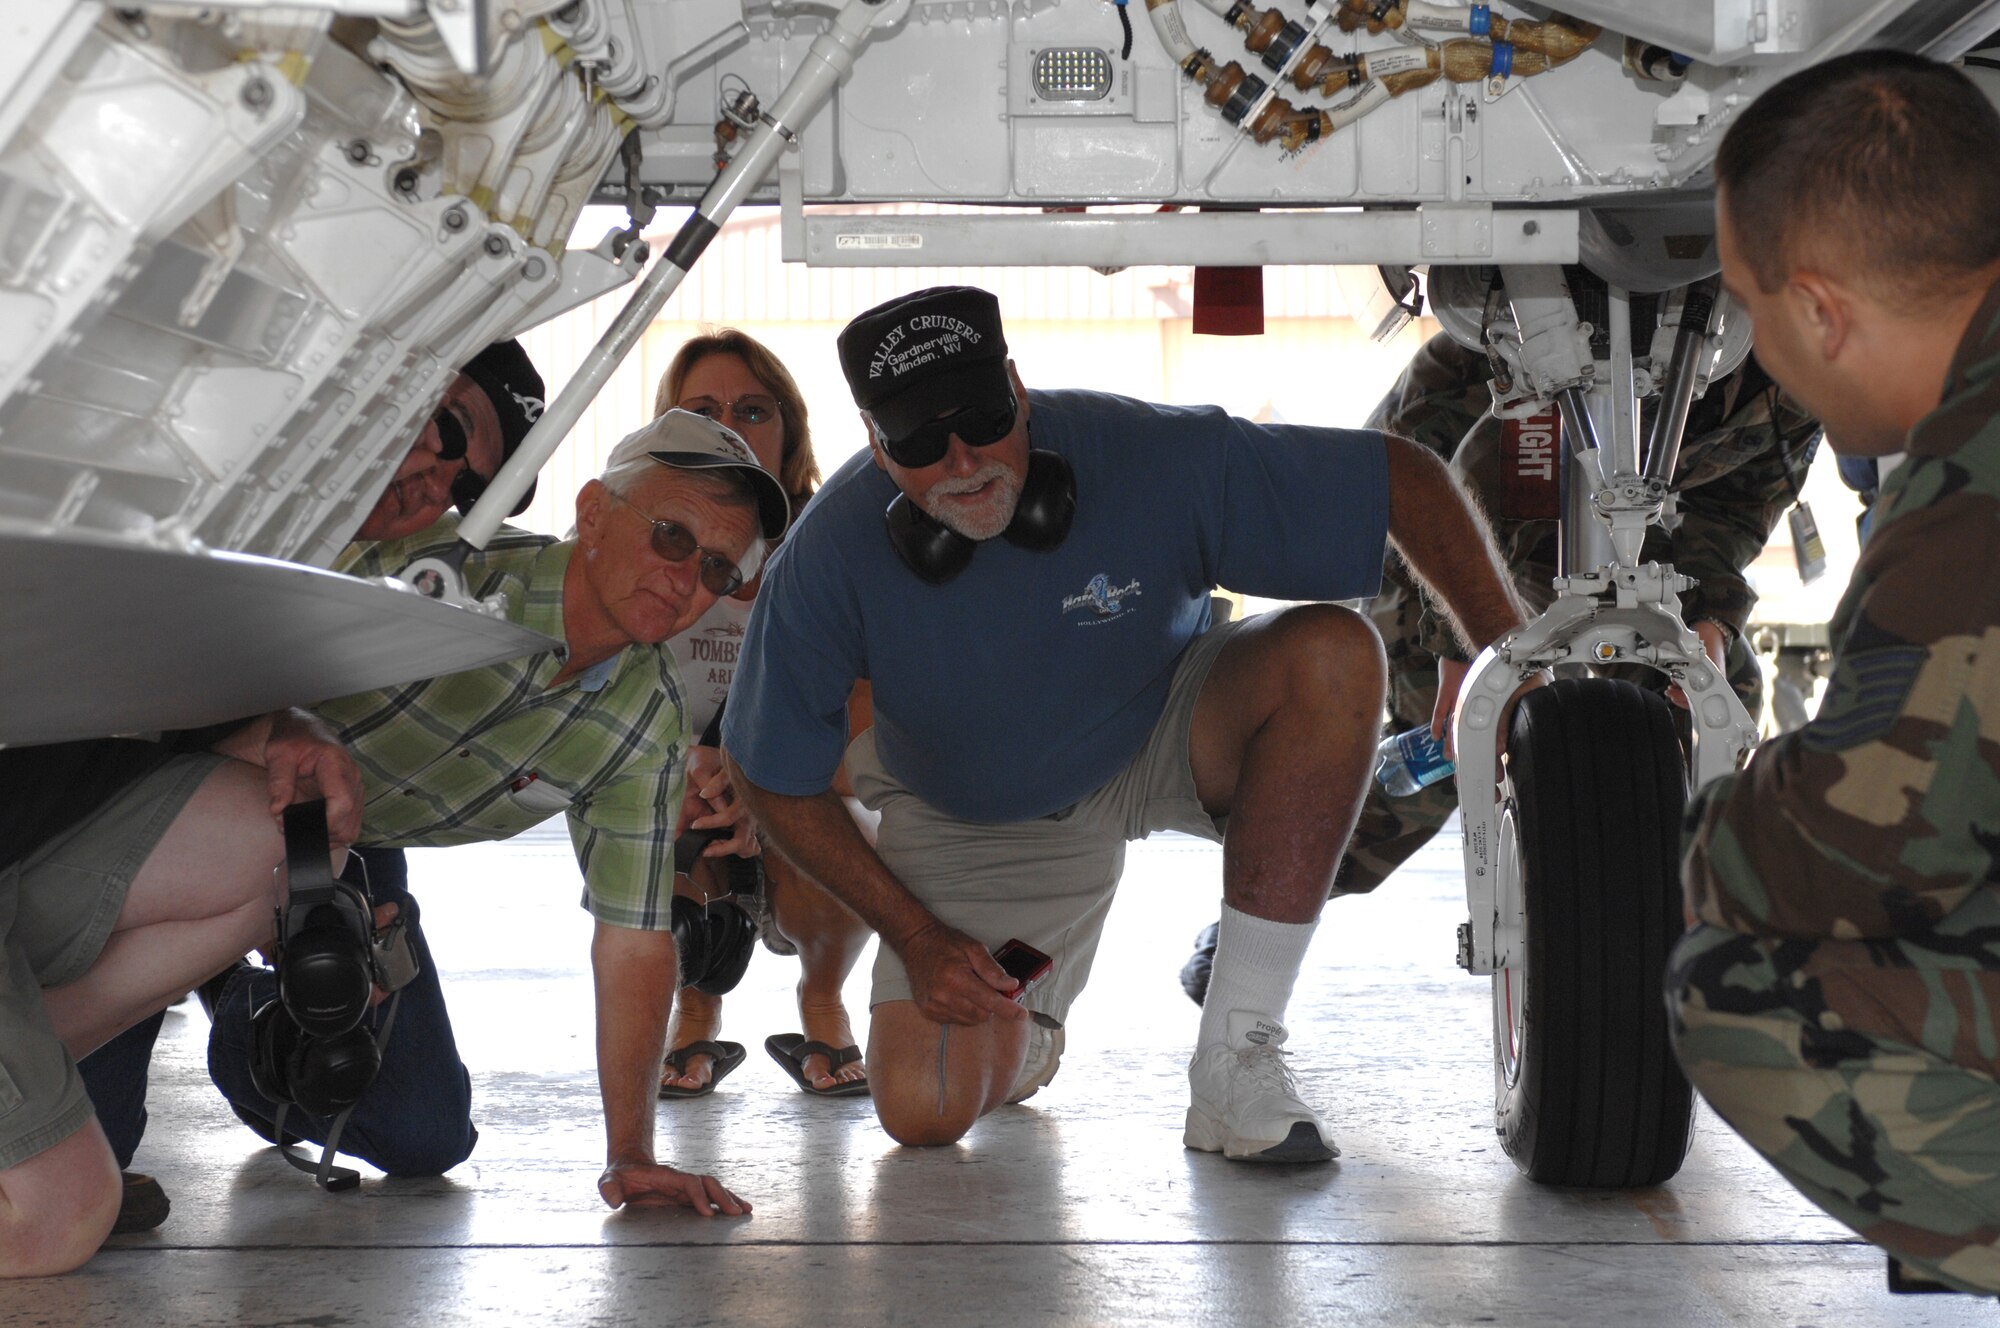 Former crew chiefs from the 8th Fighter Squadron check out the undercarriage of the F-22A Raptor during a static display at Holloman Air Force Base, N.M., September 26. The six veterans received a base tour which included the F-22 viewing. They all worked together in 1968 when the 8 FS was relocated from Spangdahlem Air Base, Germany, to Holloman, and were visiting as part of its 40 year reunion. (U.S. Air Force photo/Airman Sondra M. Escutia)